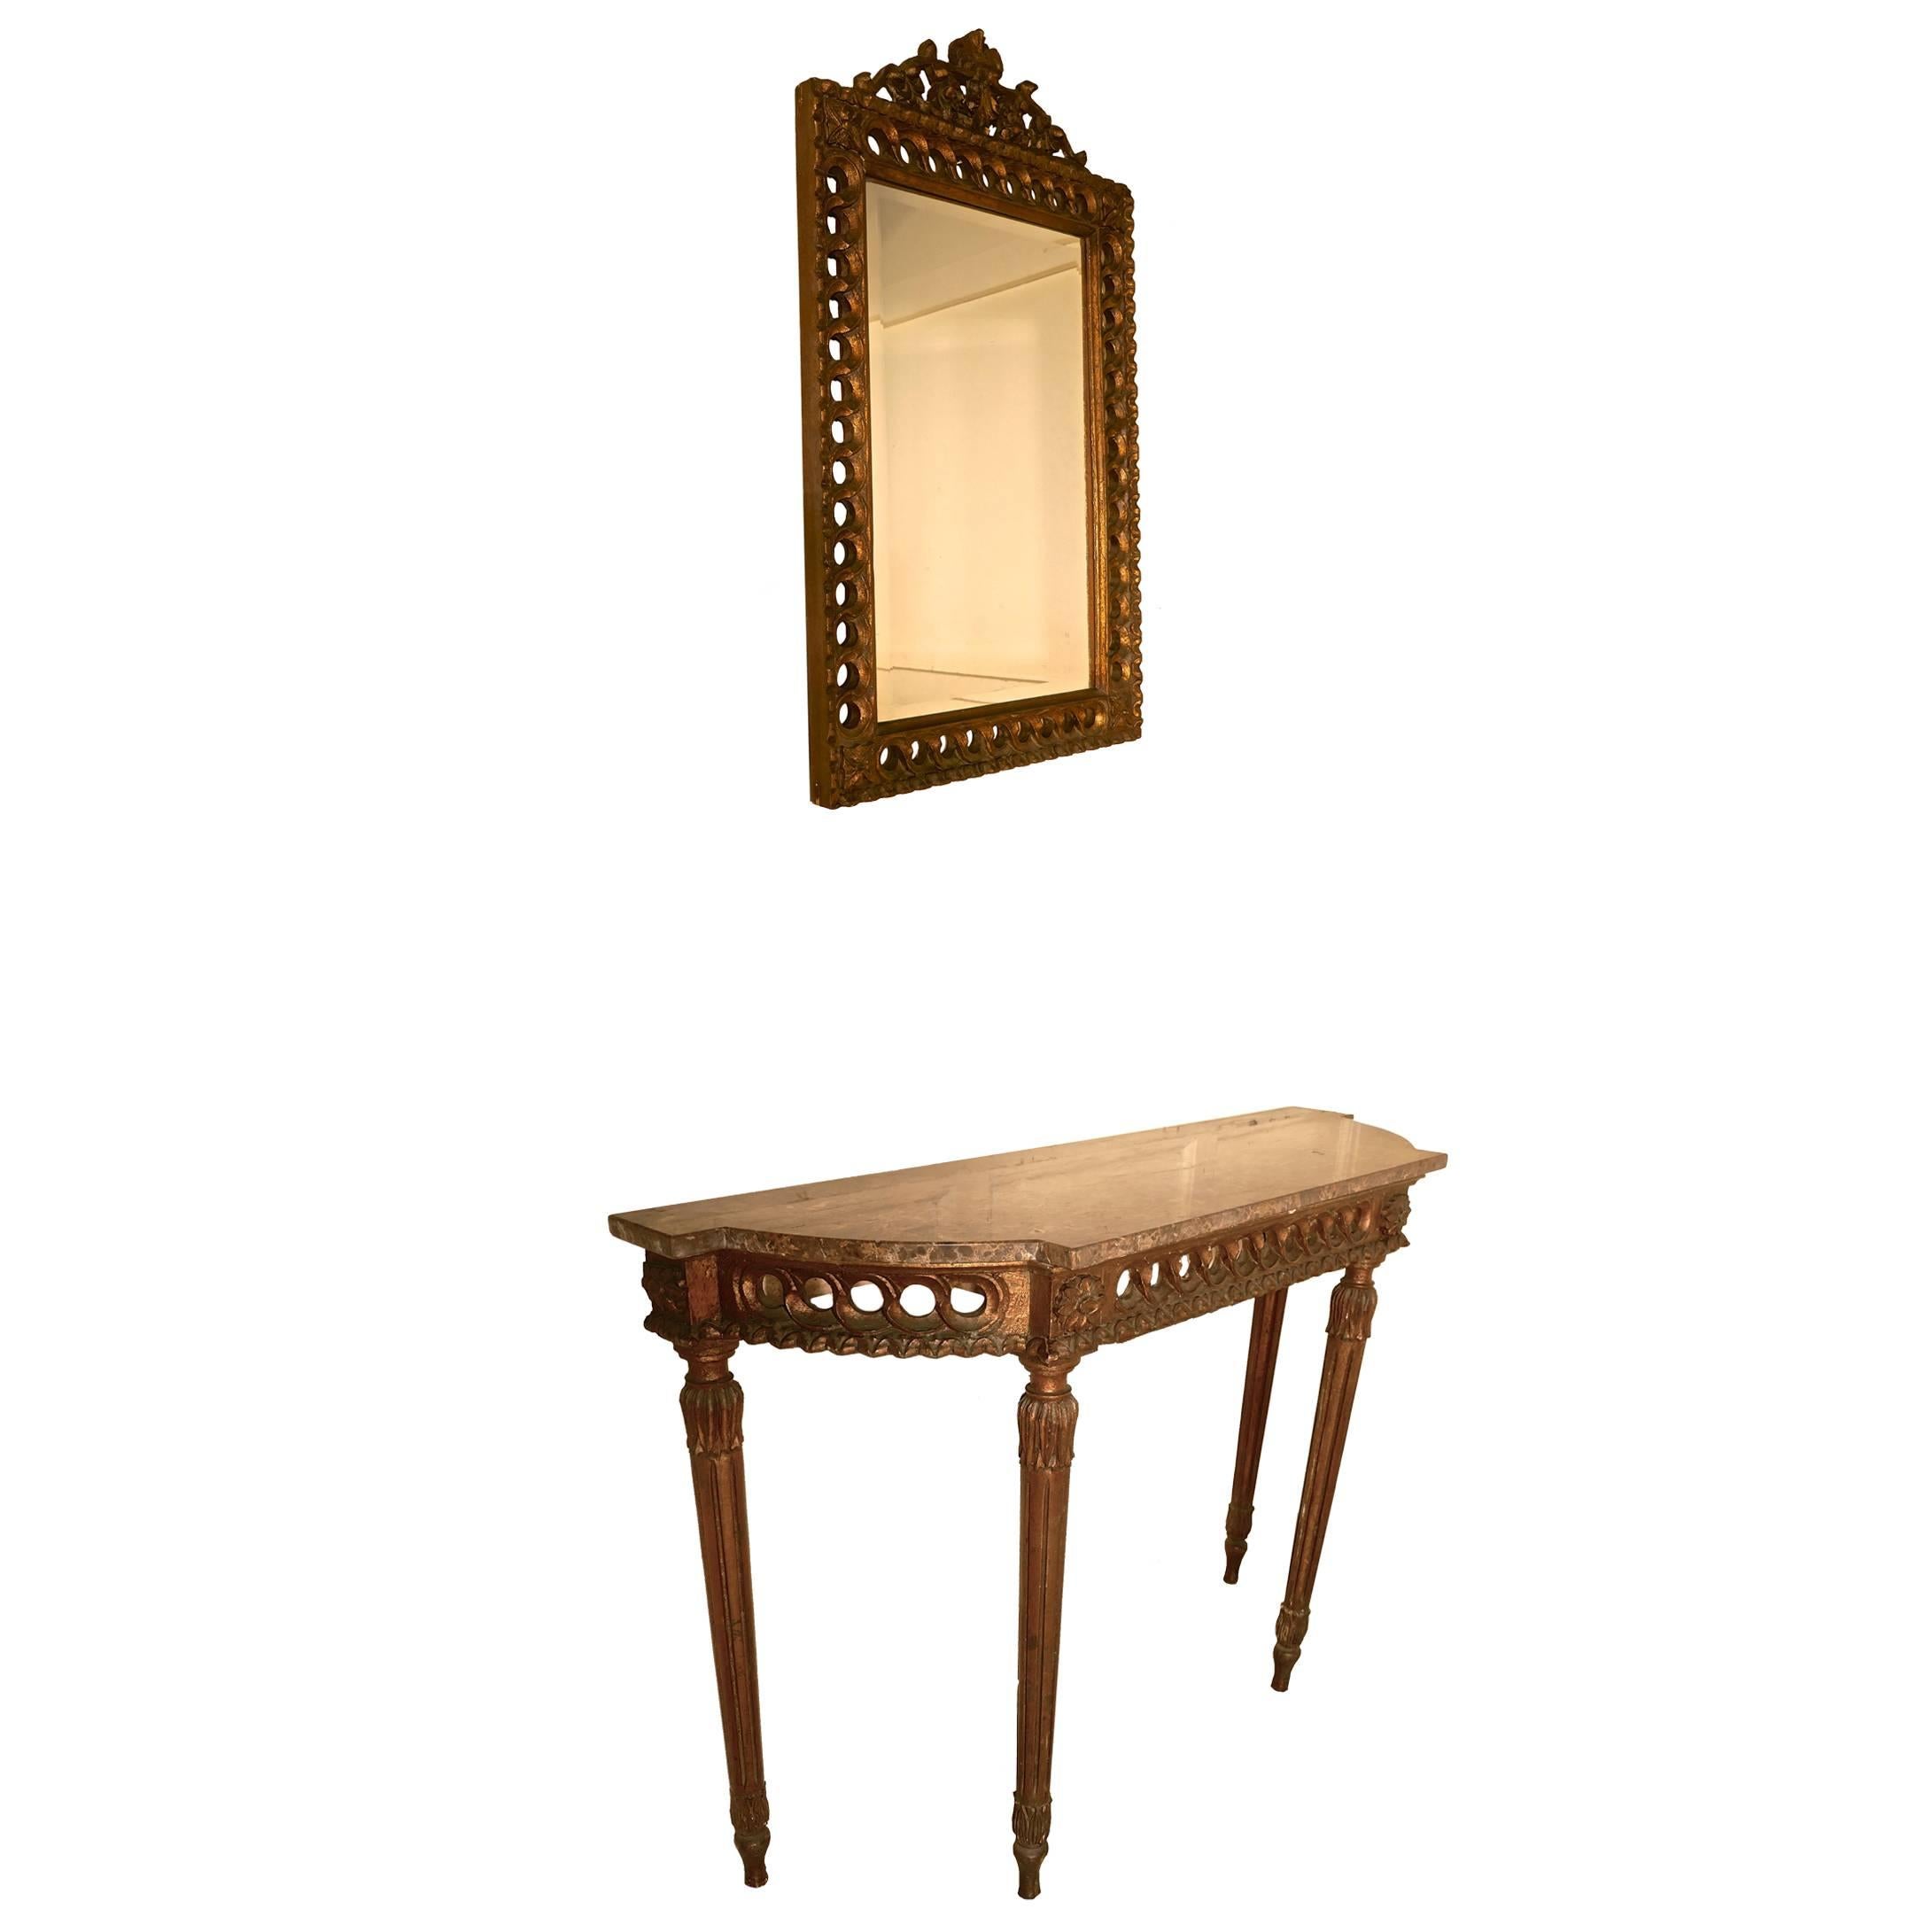 Charming, Carved French Gilt Console or Hall Table with Matching Mirror